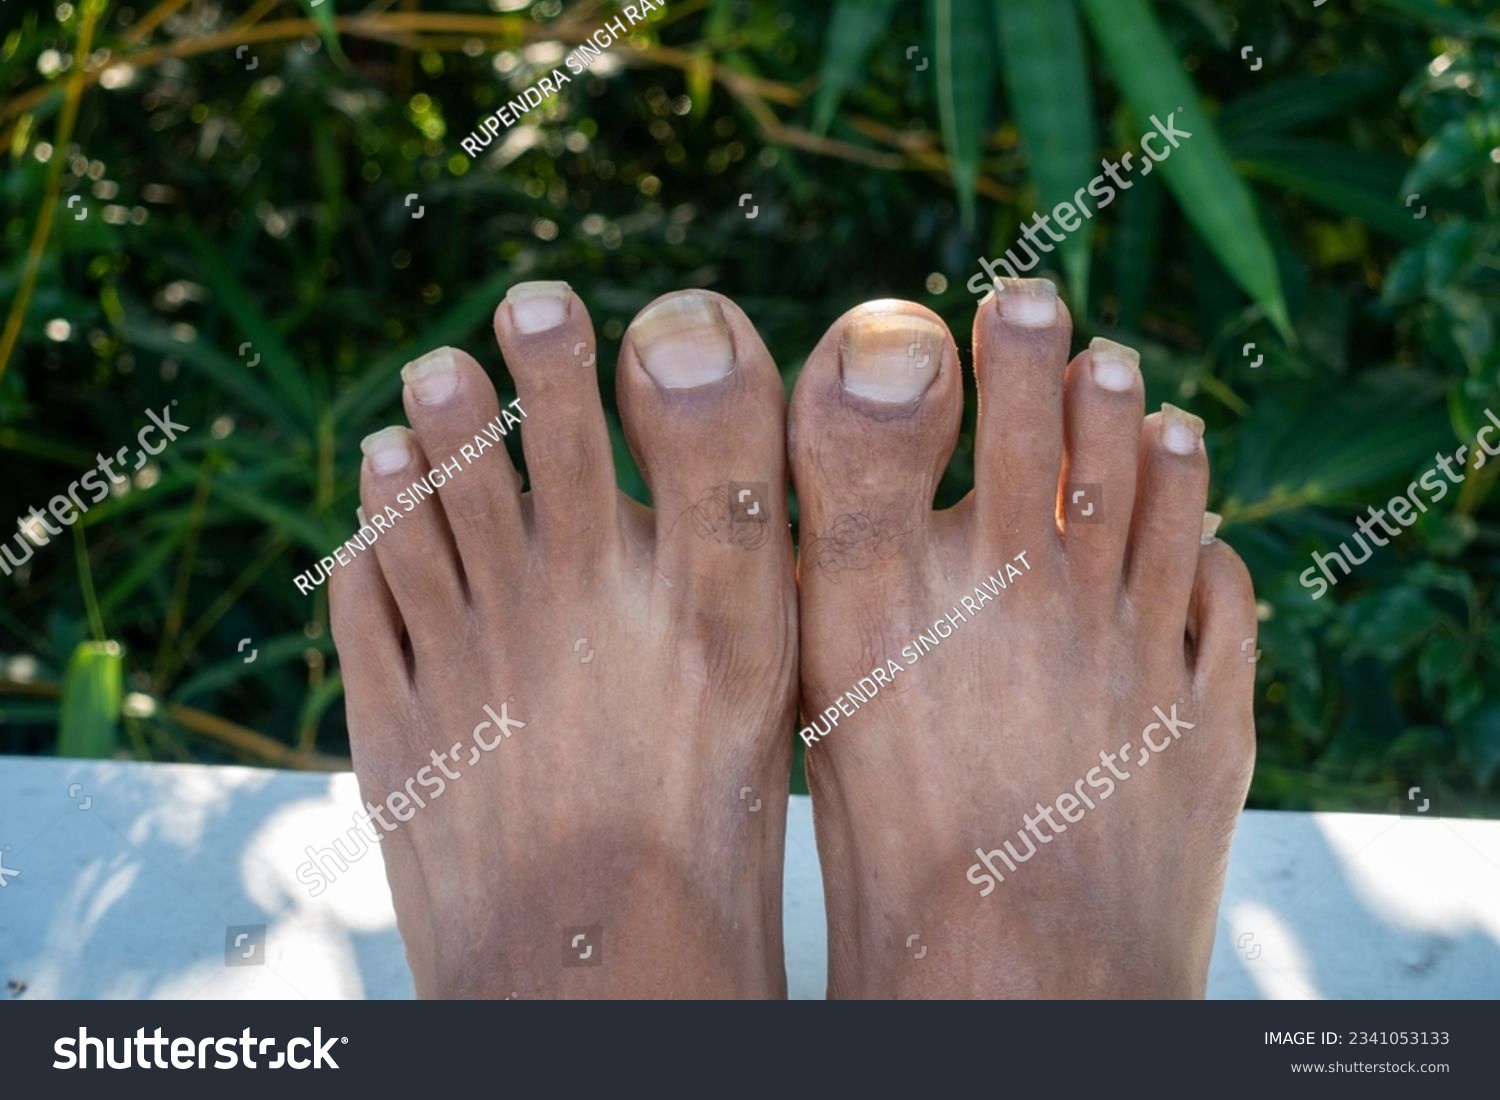 Oct.14th 2022 Uttarakhand, India. Neglected foot nails of an Indian adult with unhygienic feet conditions. Concept of self-care and personal hygiene. #2341053133